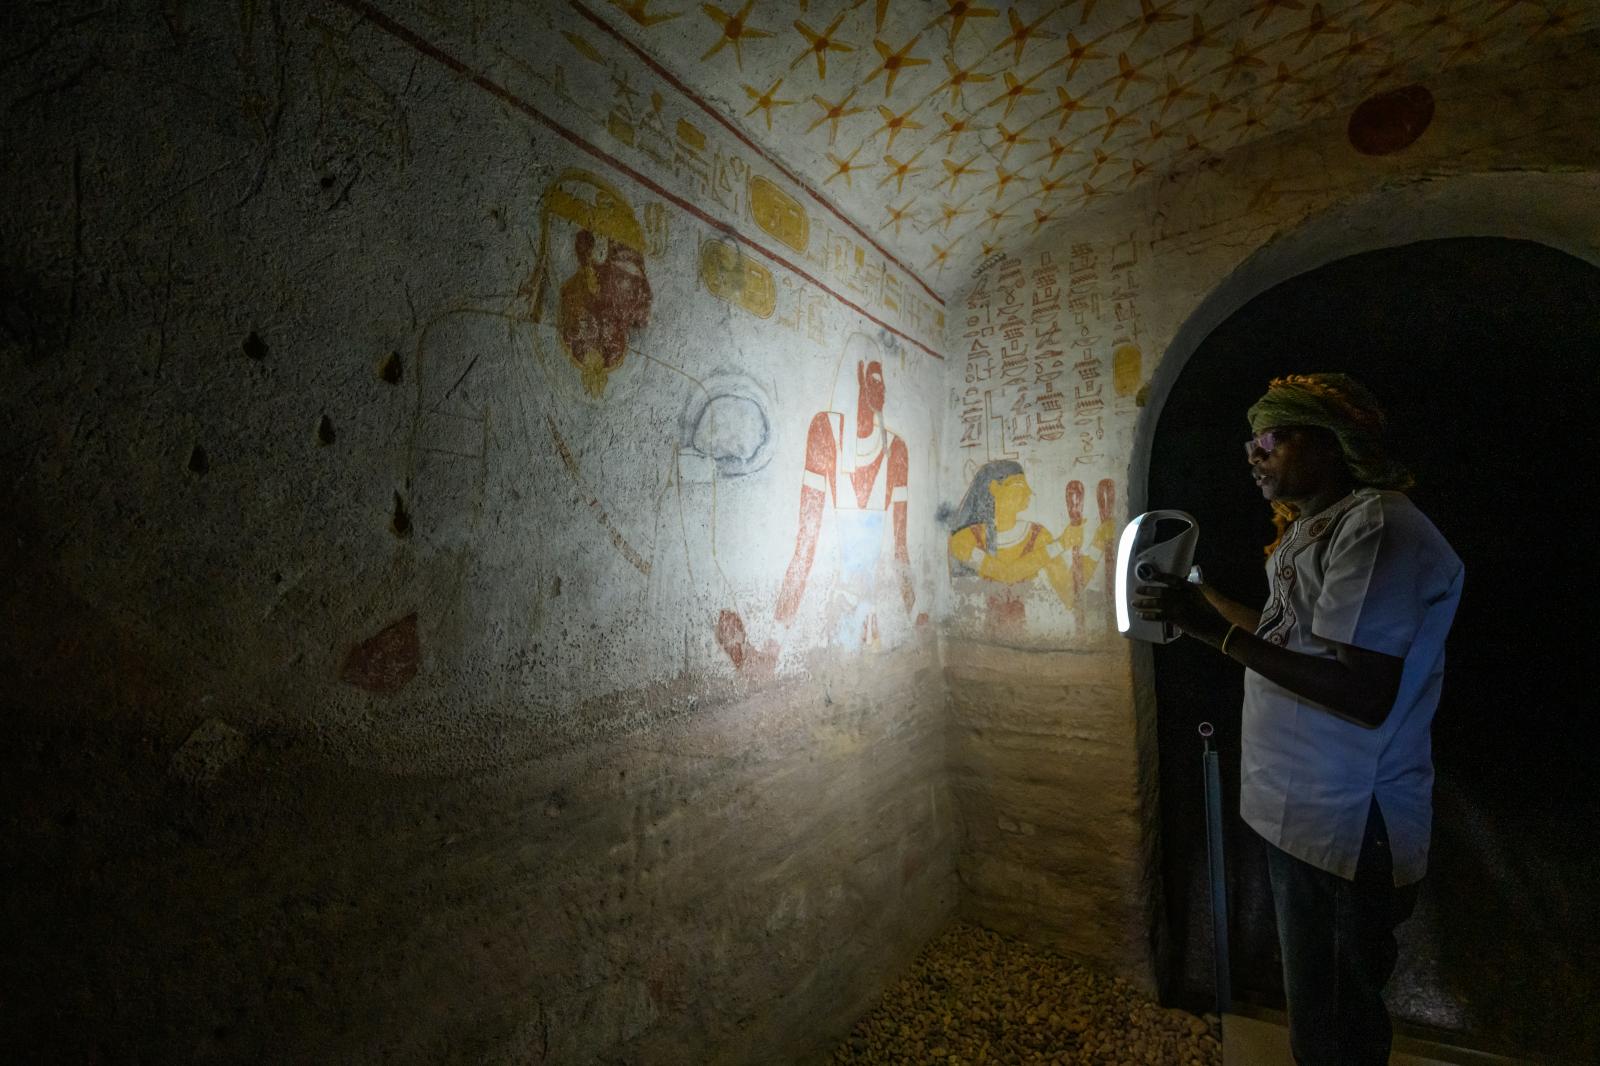 Painted murals inside the subte... Nubia during the 25th Dynasty.